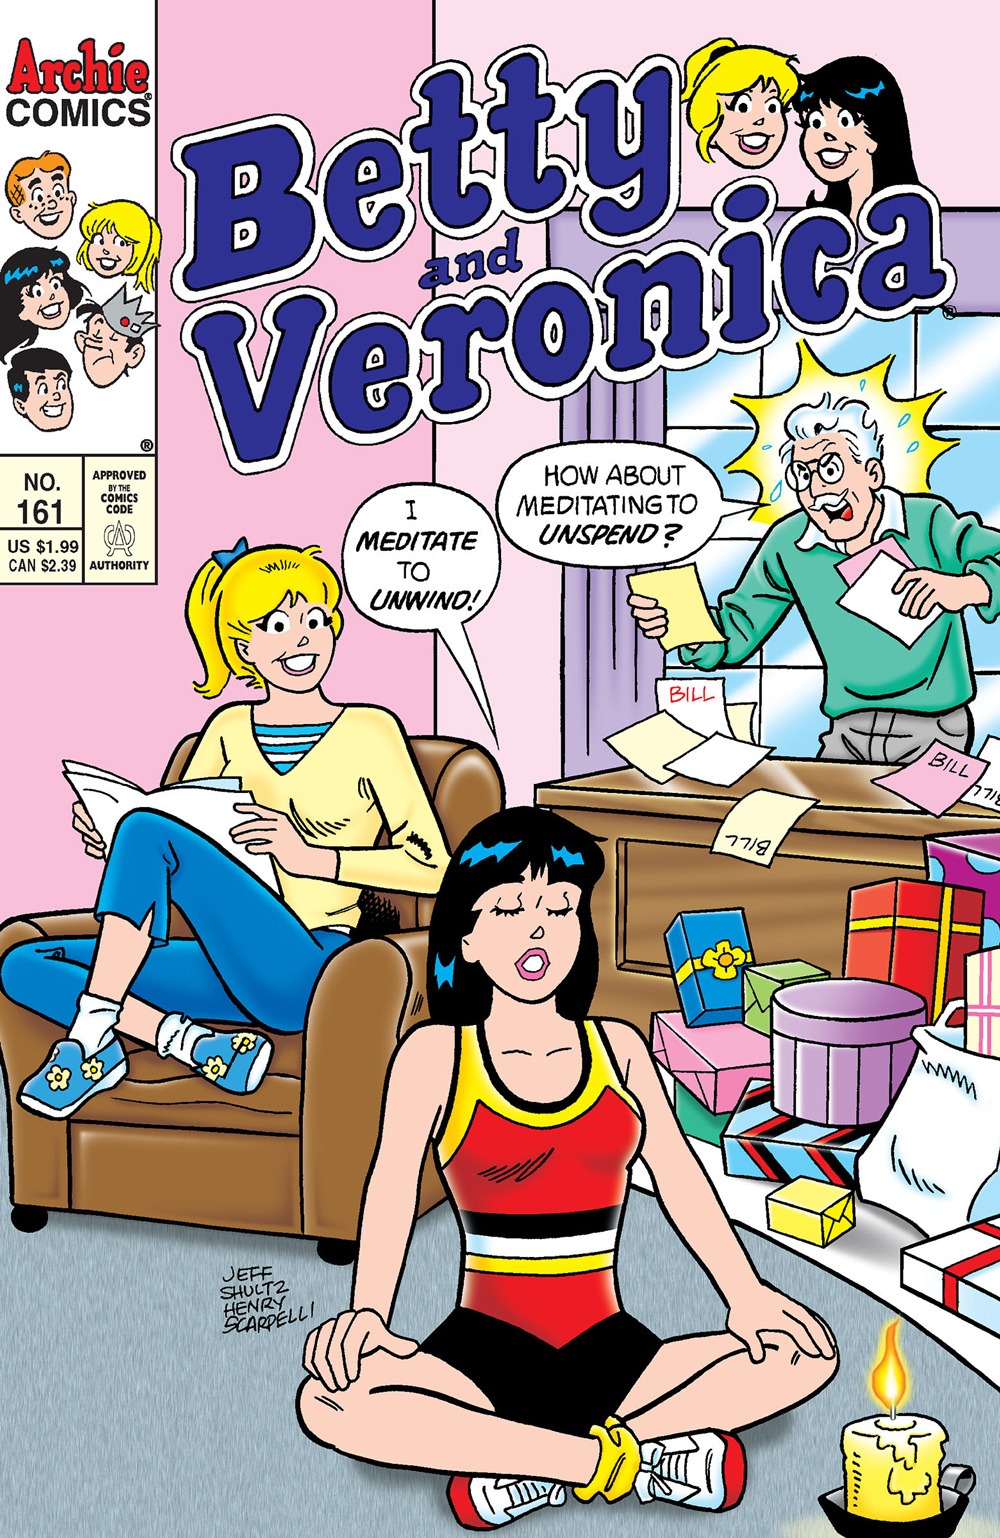 Veronica is meditating with Betty looking on smiling. Mr. Lodge is behind them opening bills, angry. Veronica says she meditates to unwind and he says she should mediate to unspend.